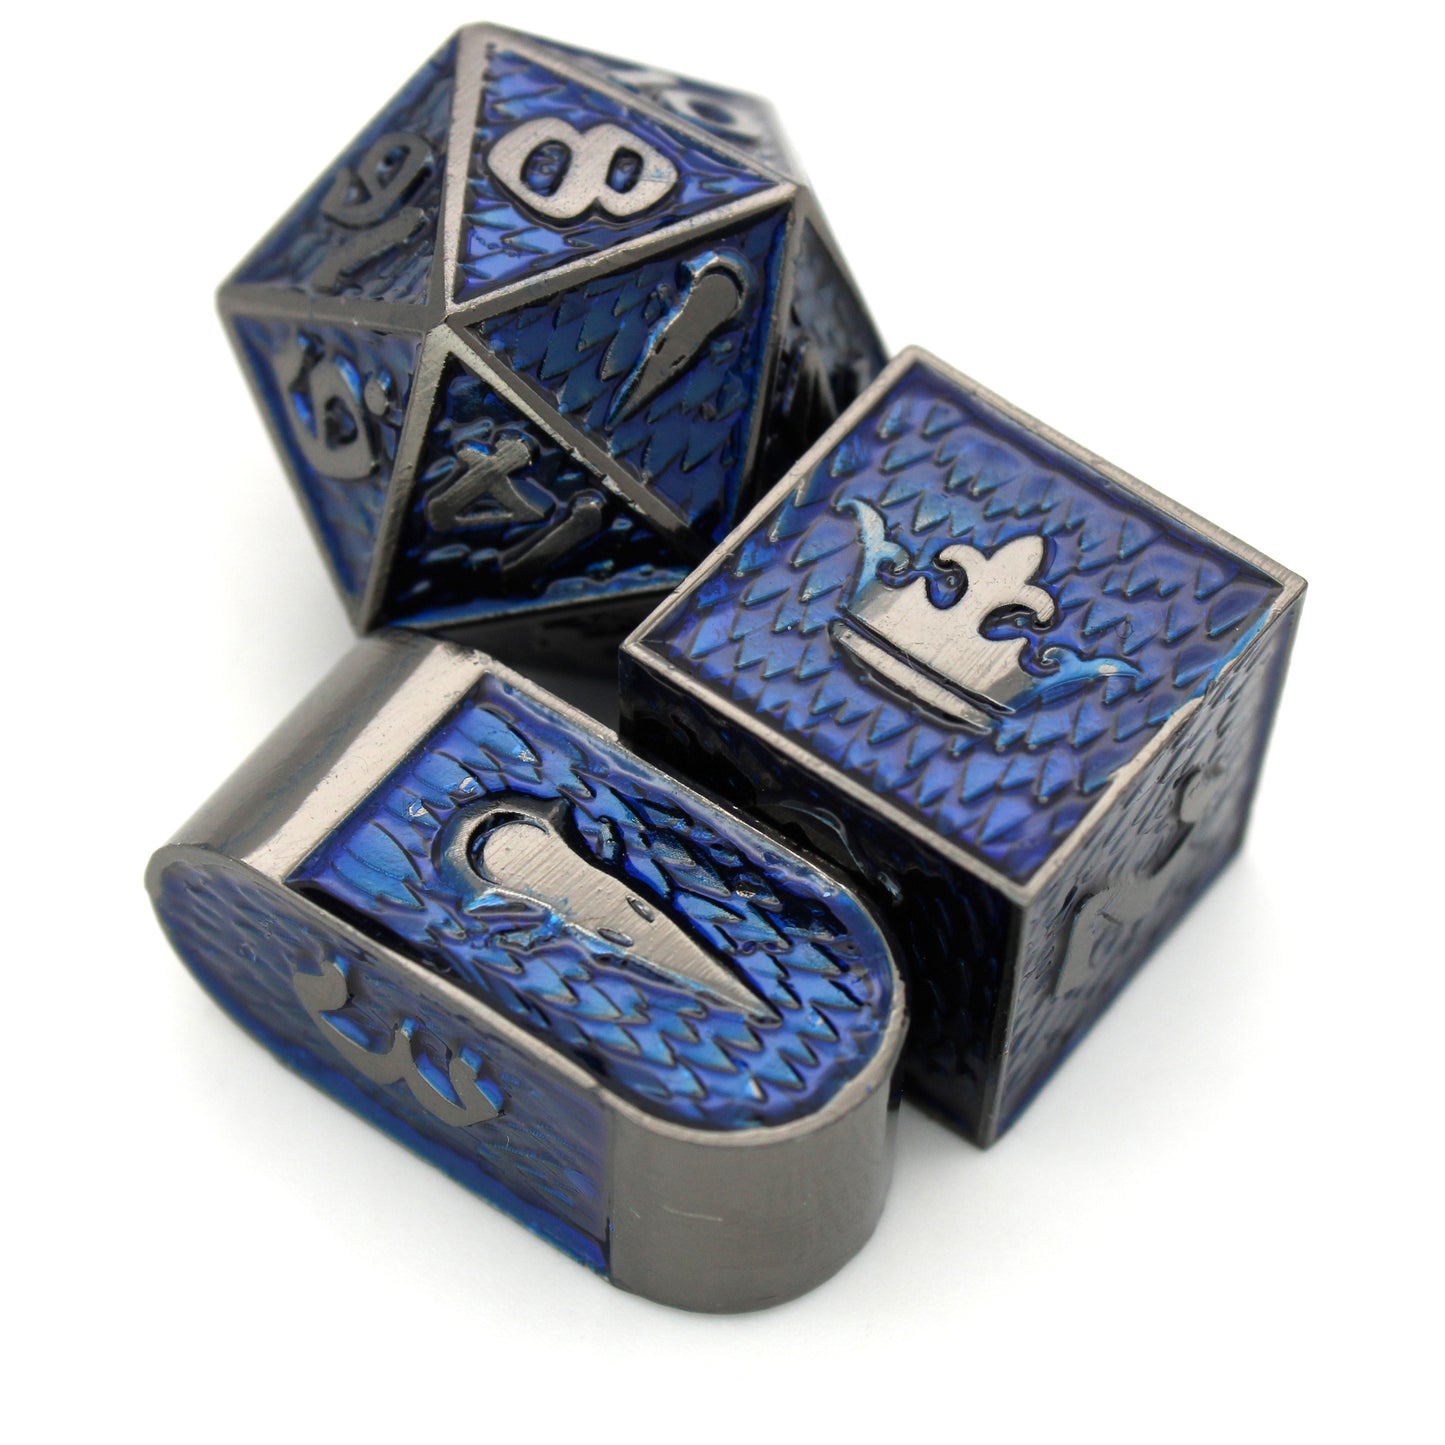 Duskmaven is an 8-piece Dice Envy exclusive set of dark, gunmetal dice in our Raven Queen mold, cloaked in twilight blue ink.